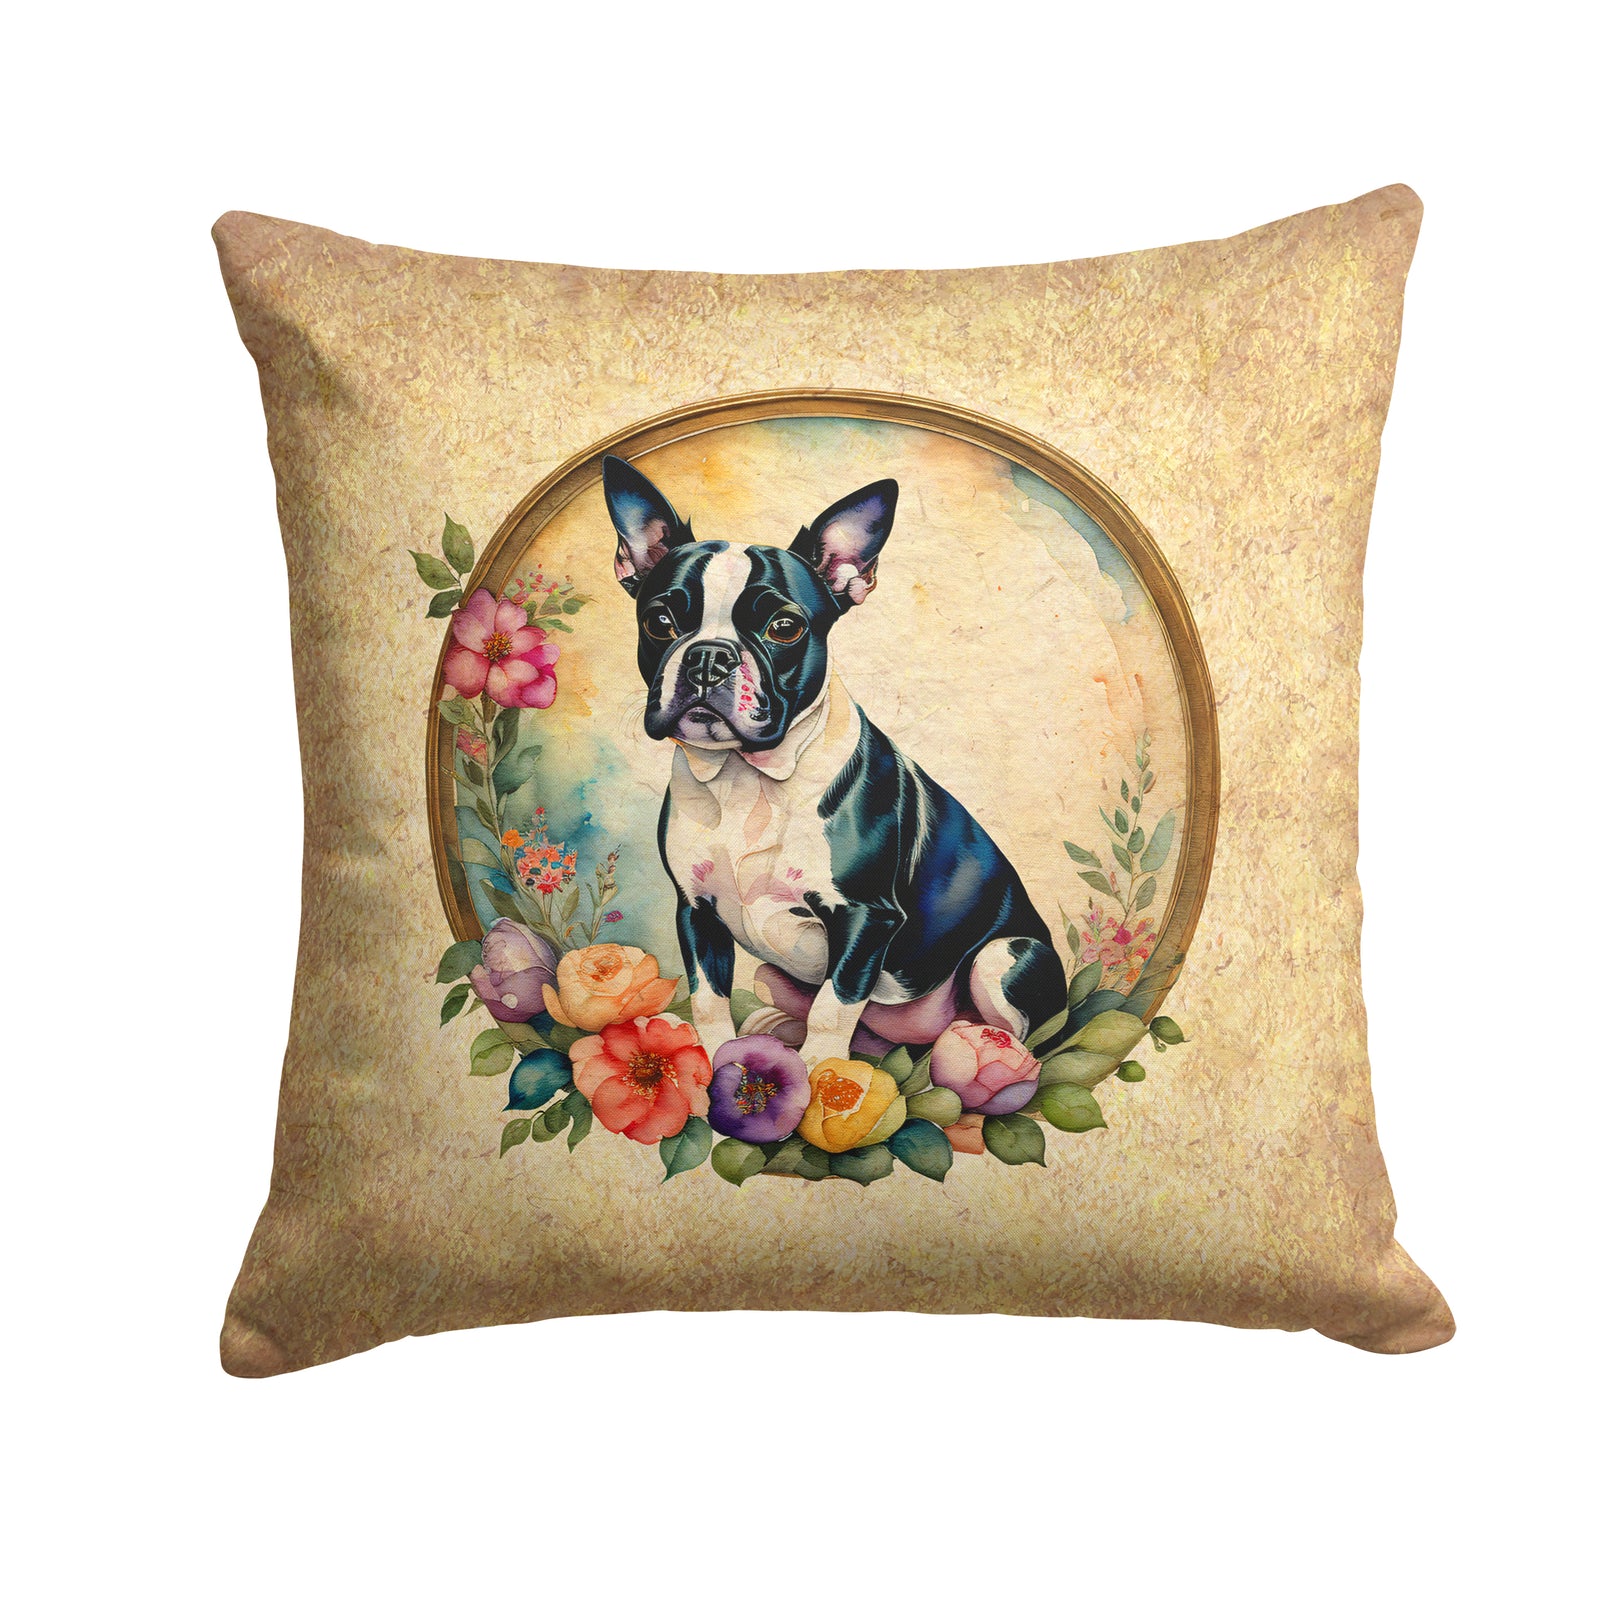 Buy this Boston Terrier and Flowers Fabric Decorative Pillow